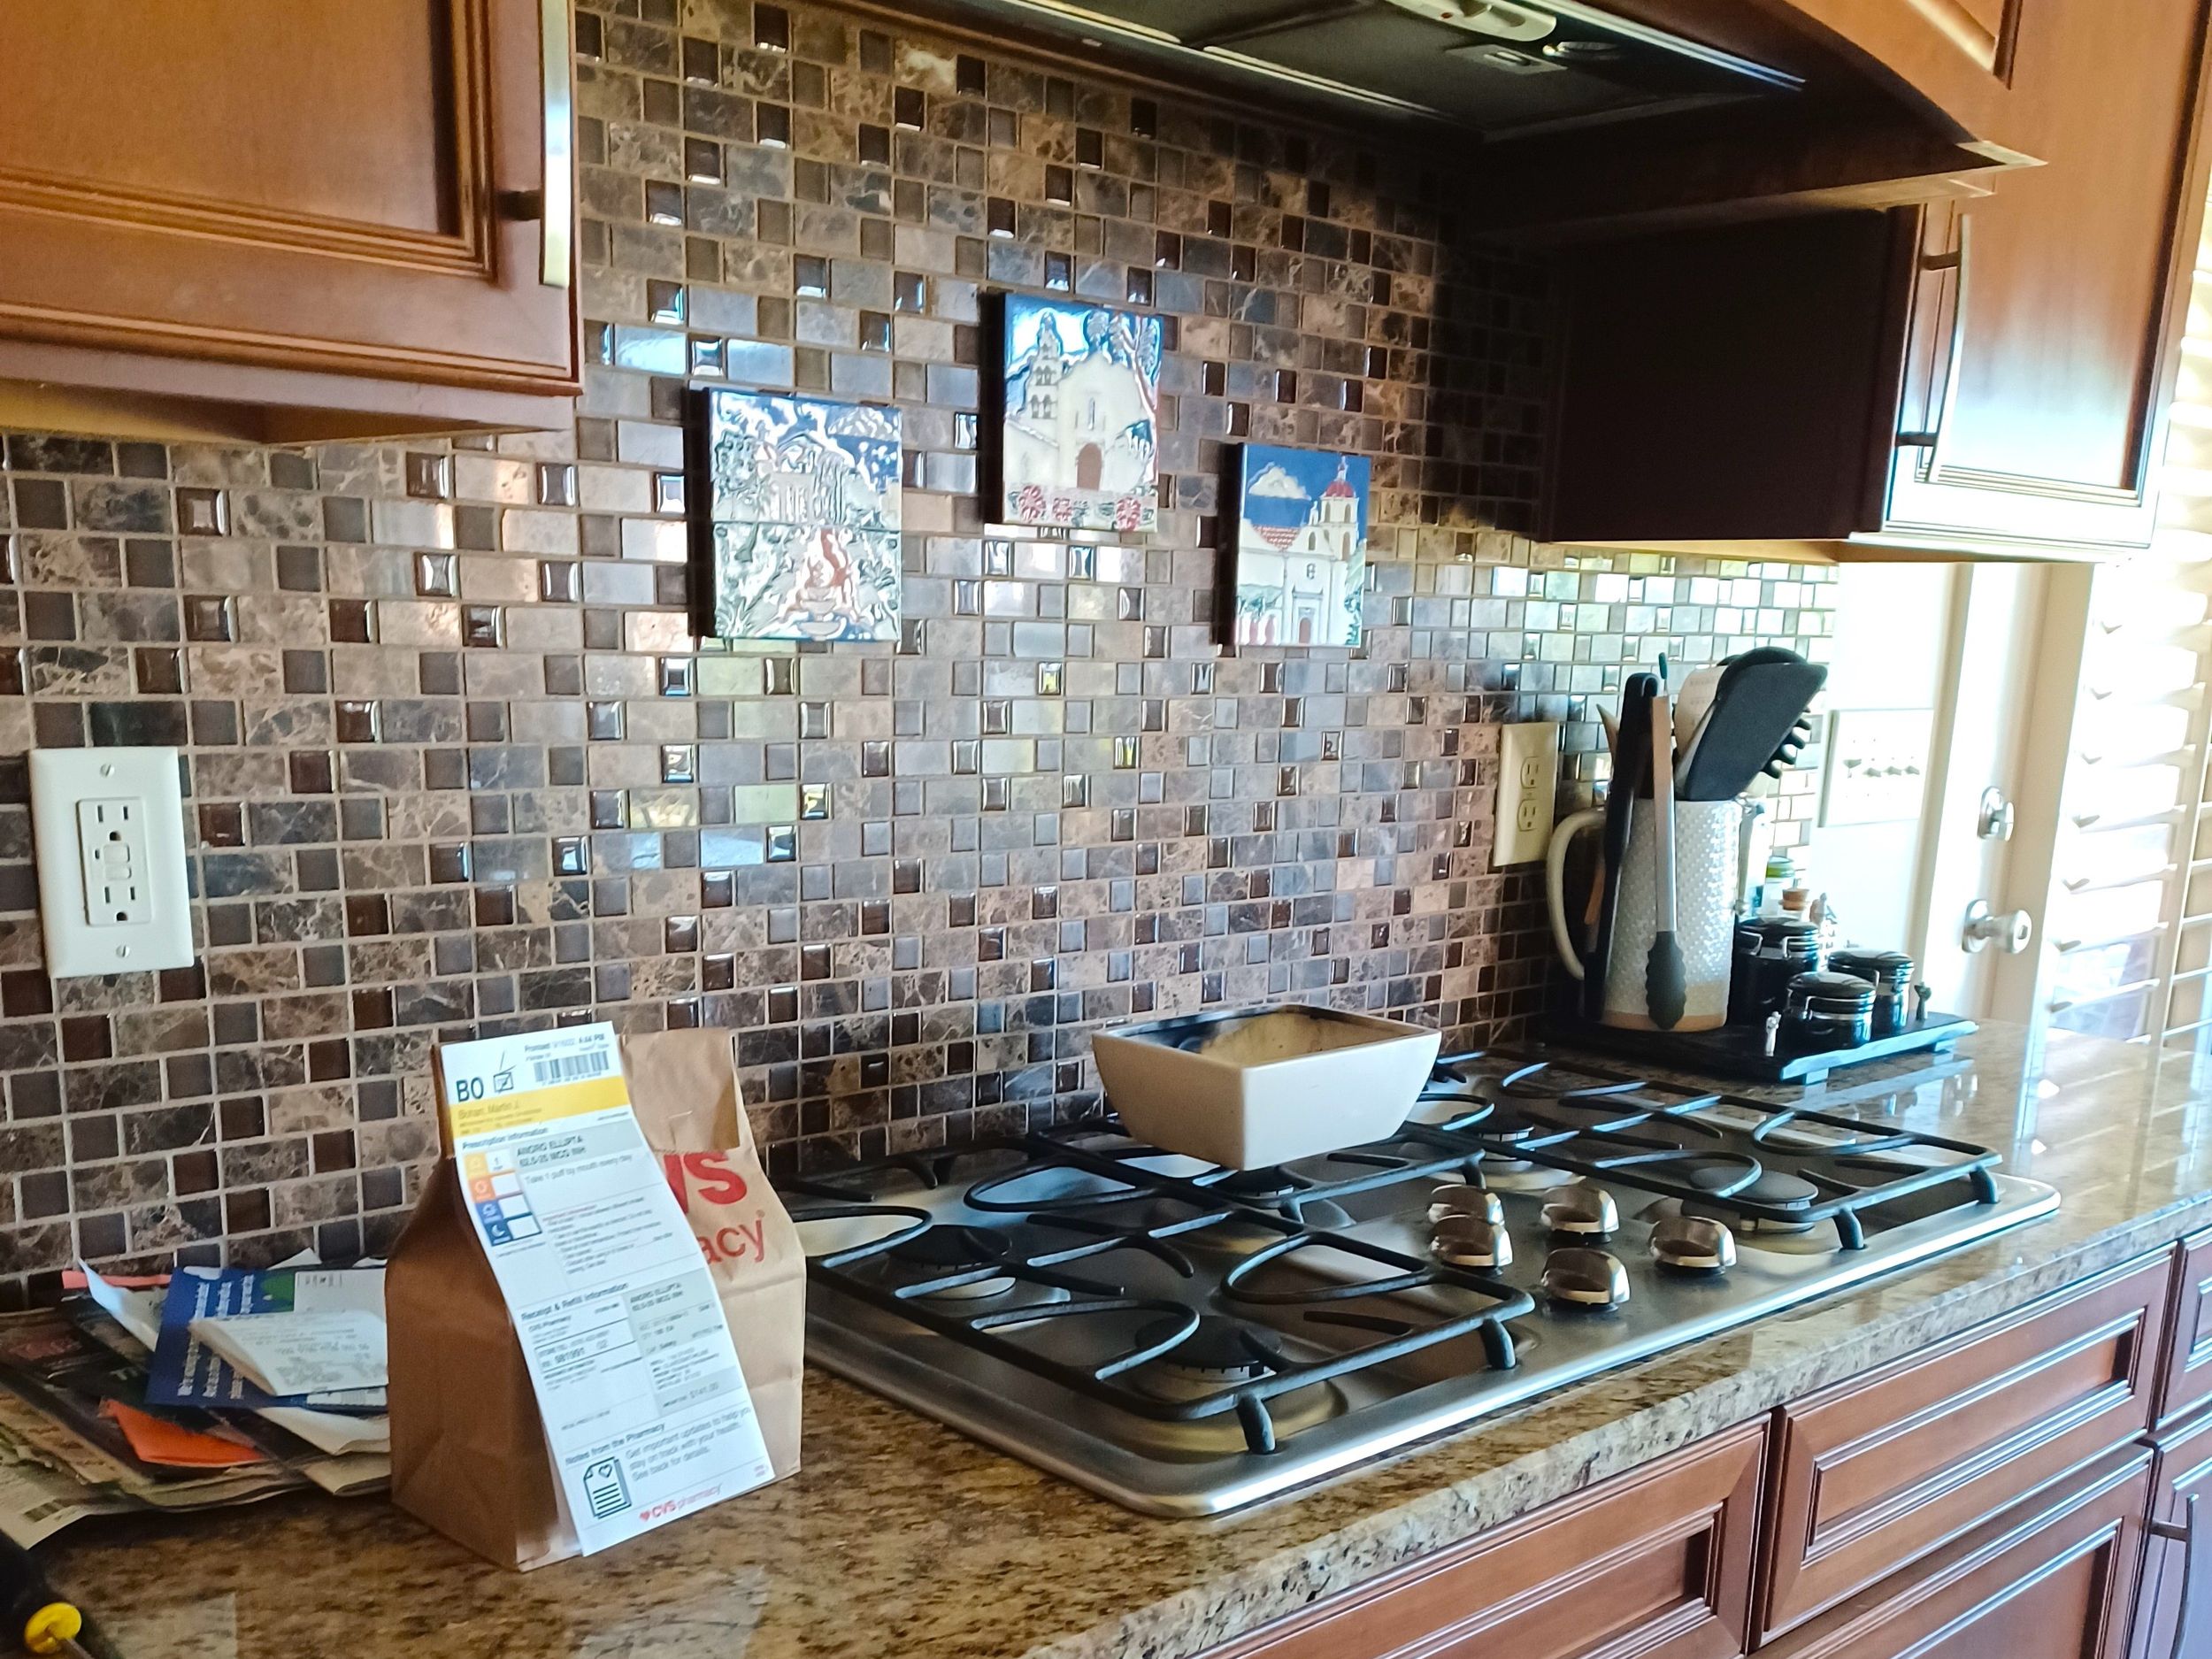 Kitchen Tile Backsplash Ideas You Need to See Right Now